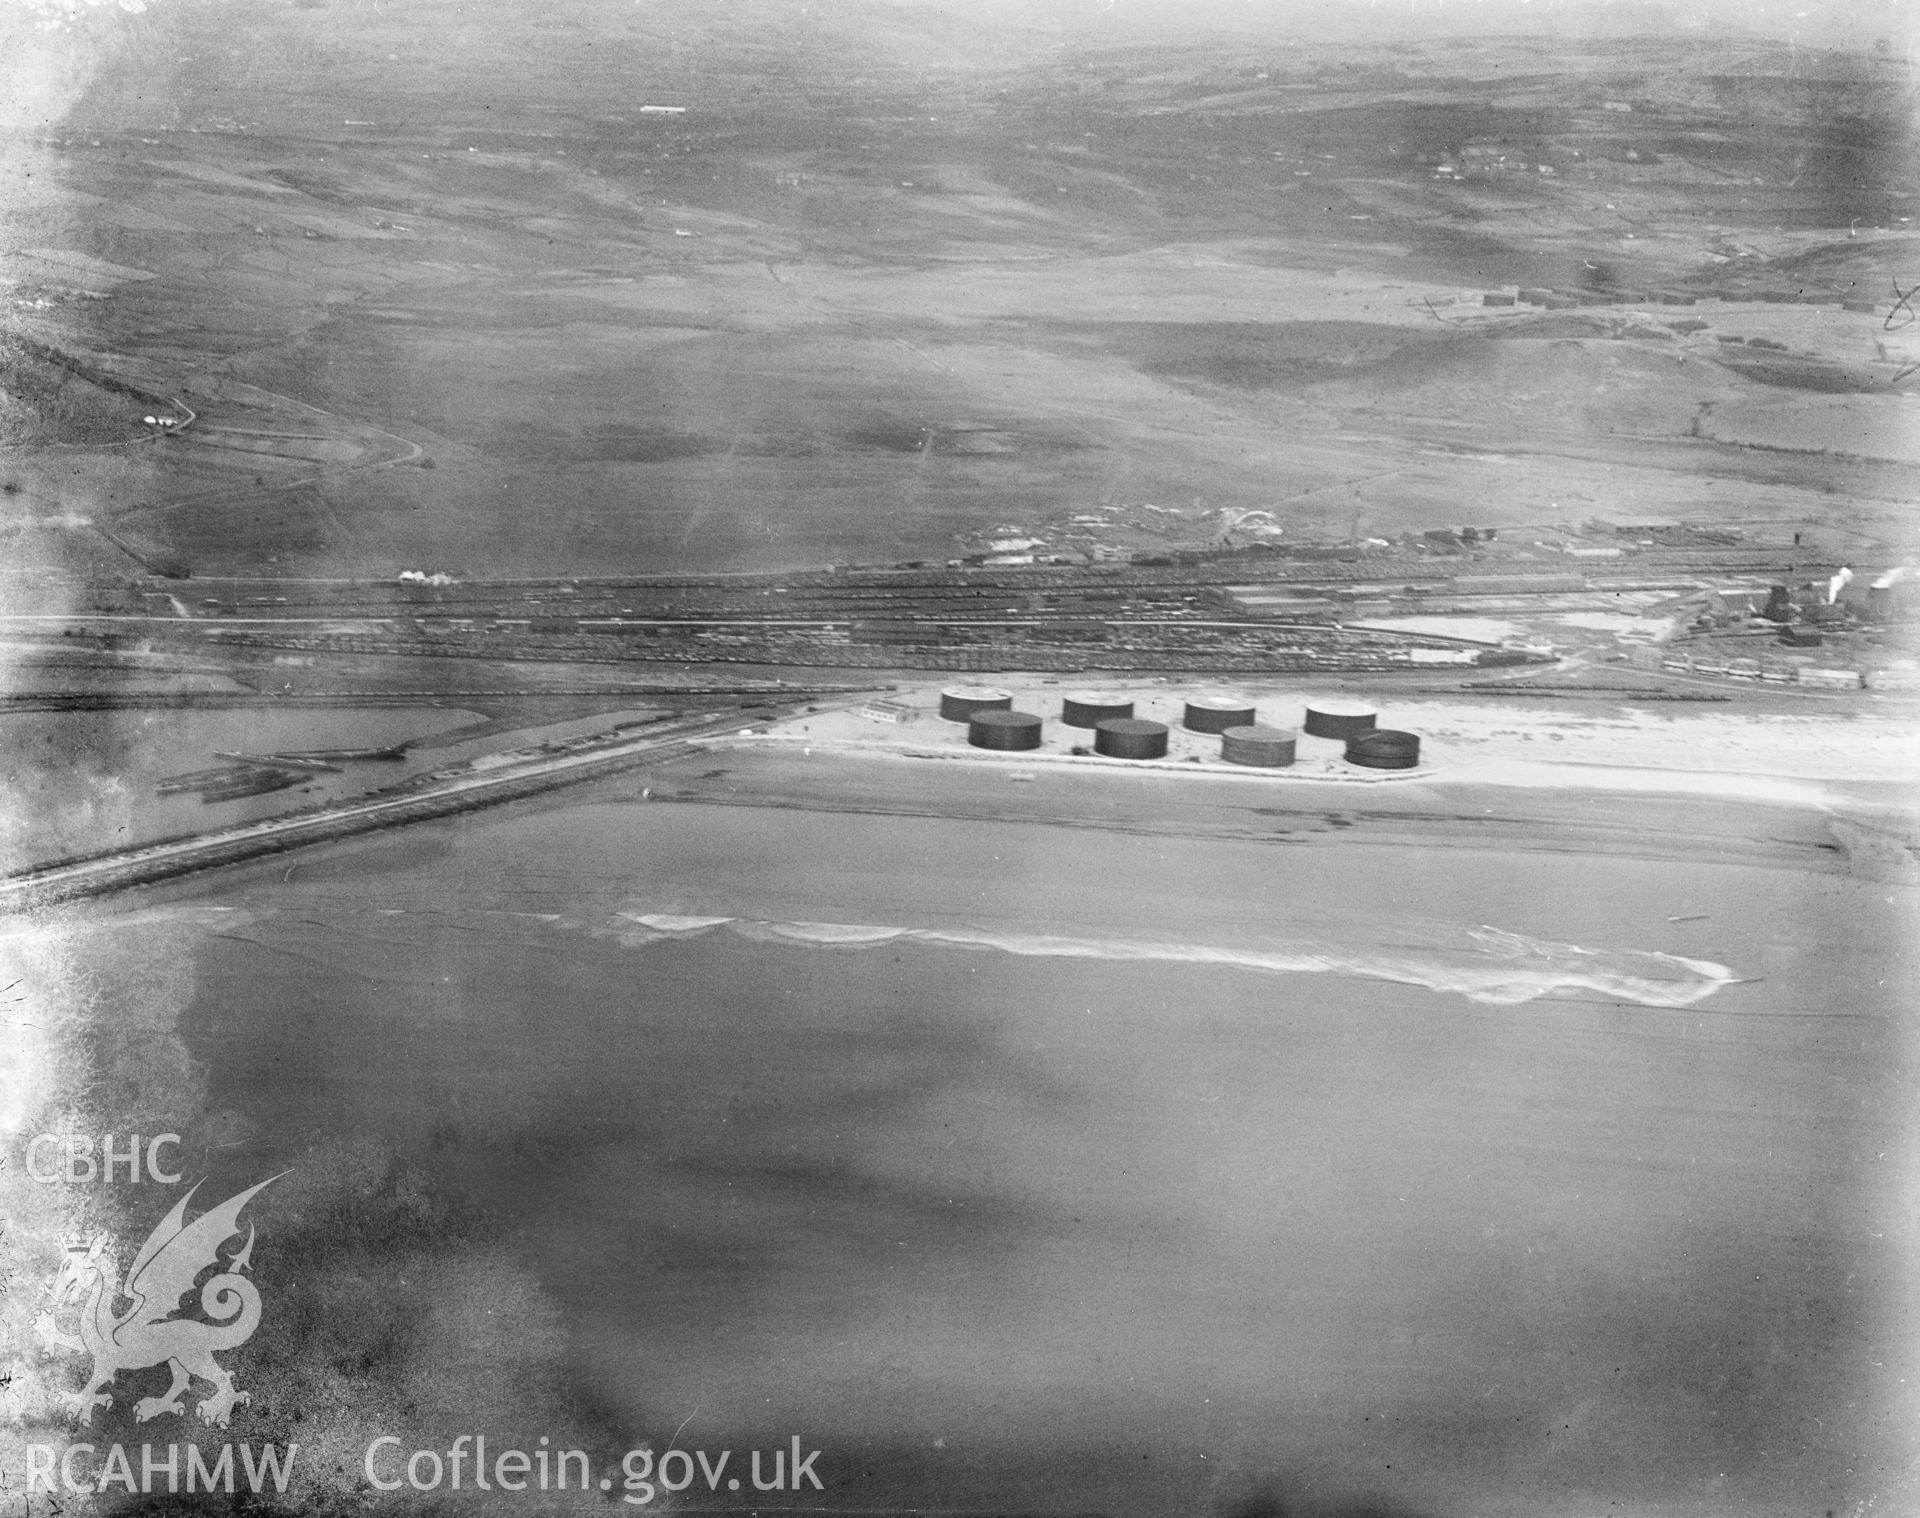 View of Crumlin Burrows, Swansea, storage drums, oblique aerial view. 5?x4? black and white glass plate negative.